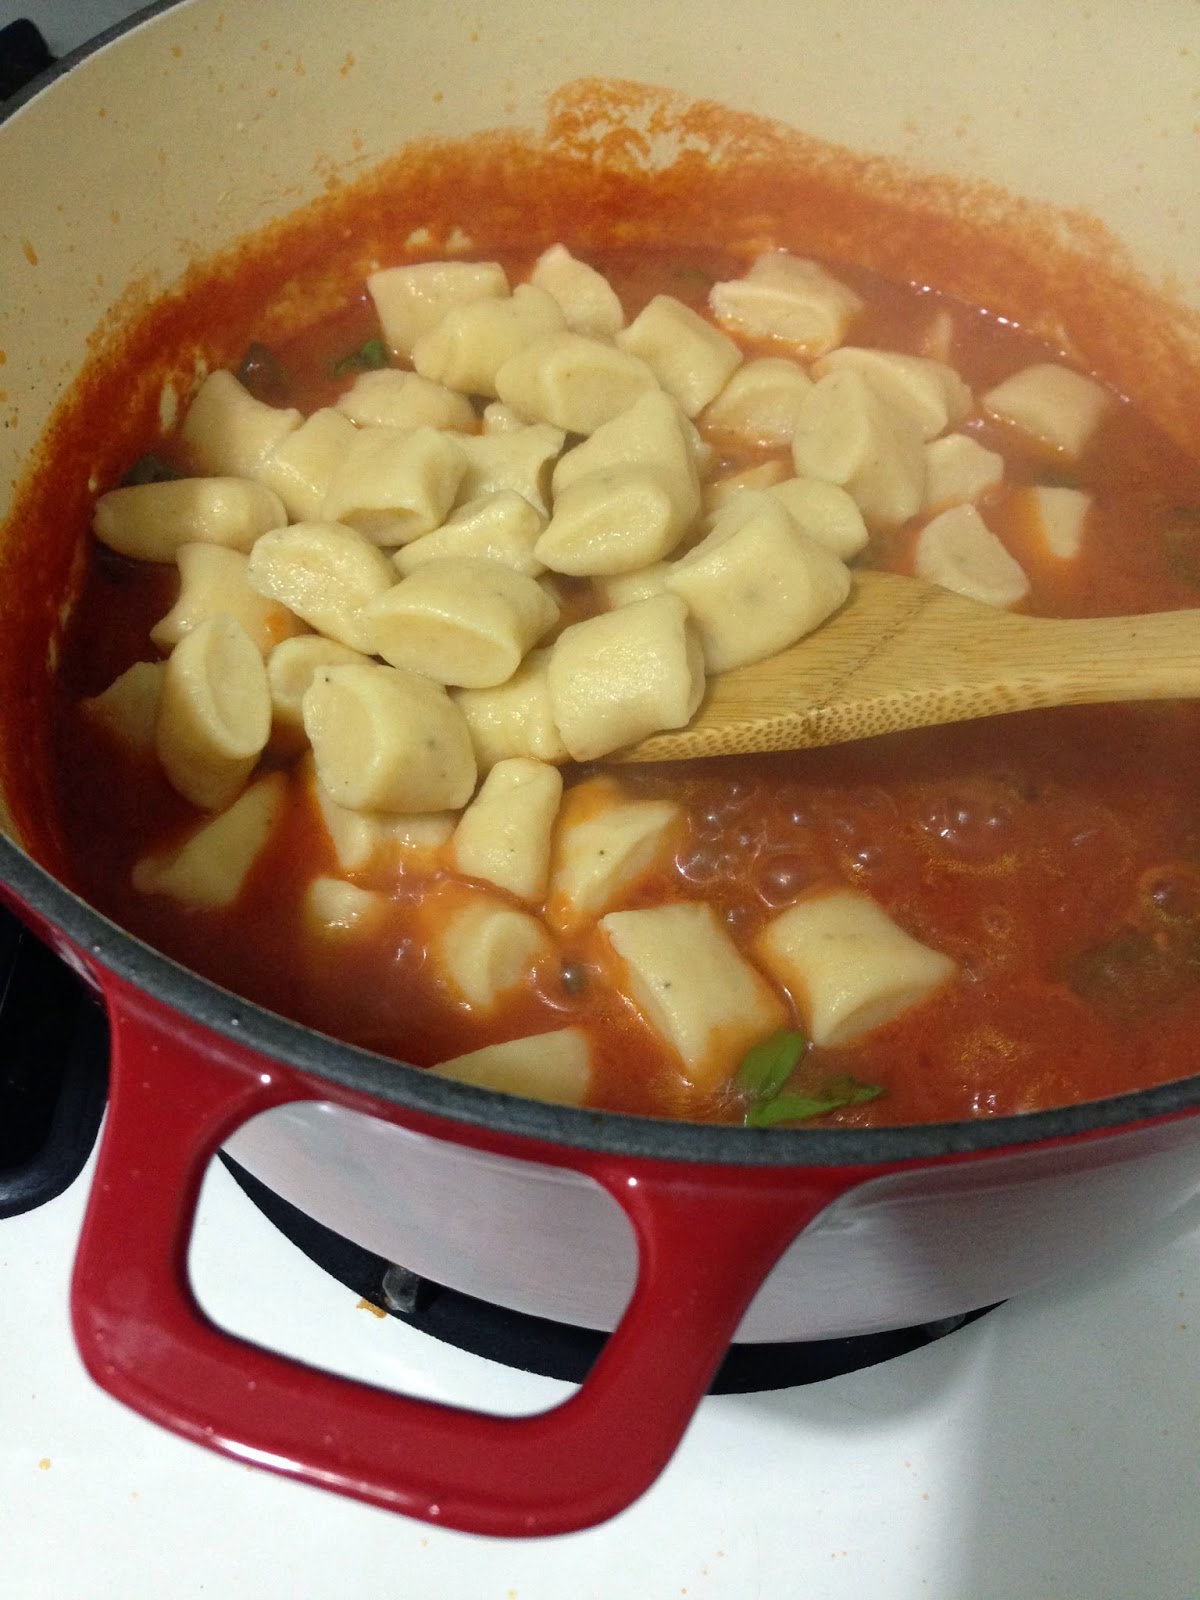 Ricotta Dumplings with Tomato and Basil Sauce by Gennaro Contaldo from Two Greedy Italians Cookbook.